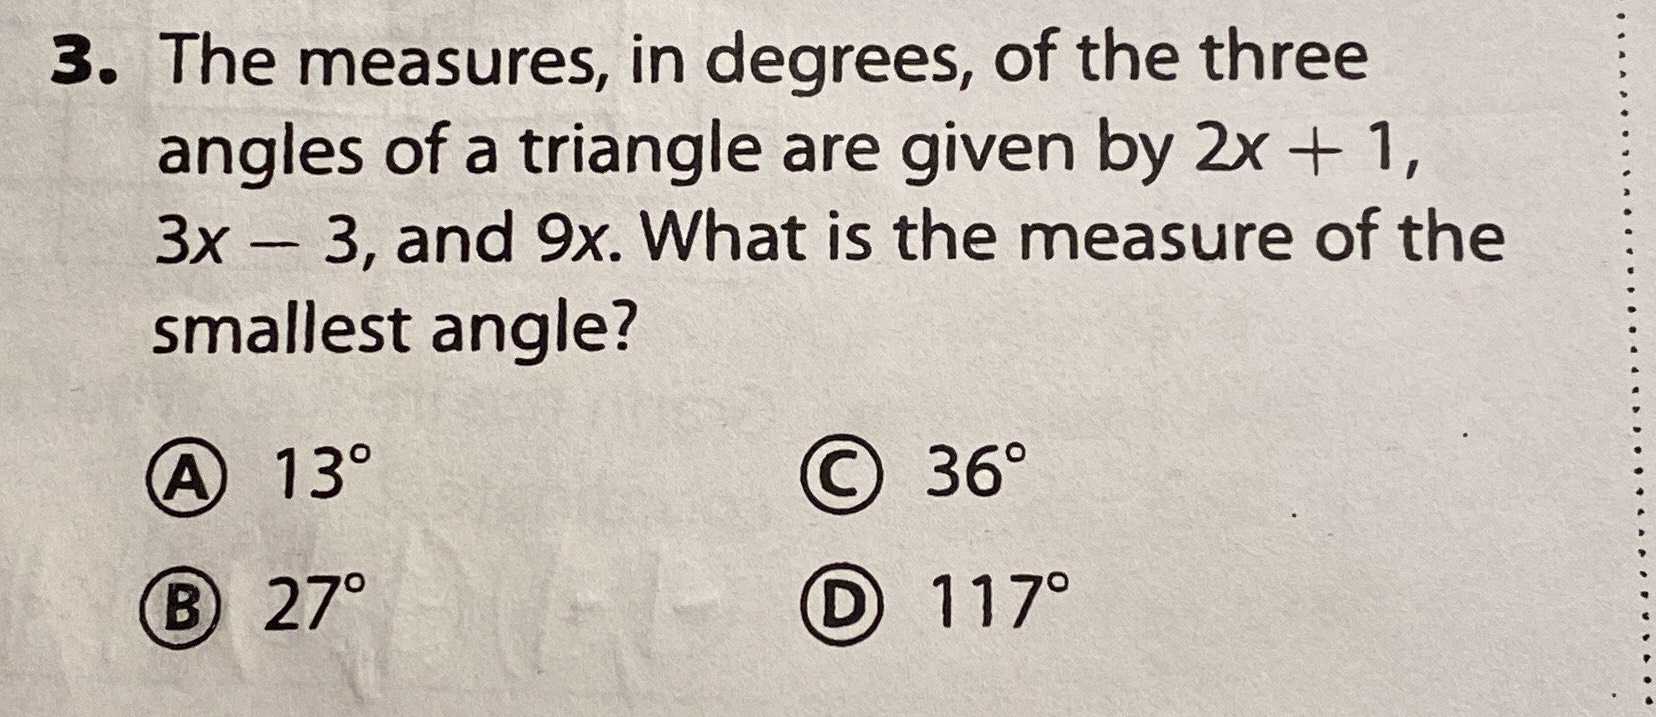 The measures, in degrees, of the three angles of a...